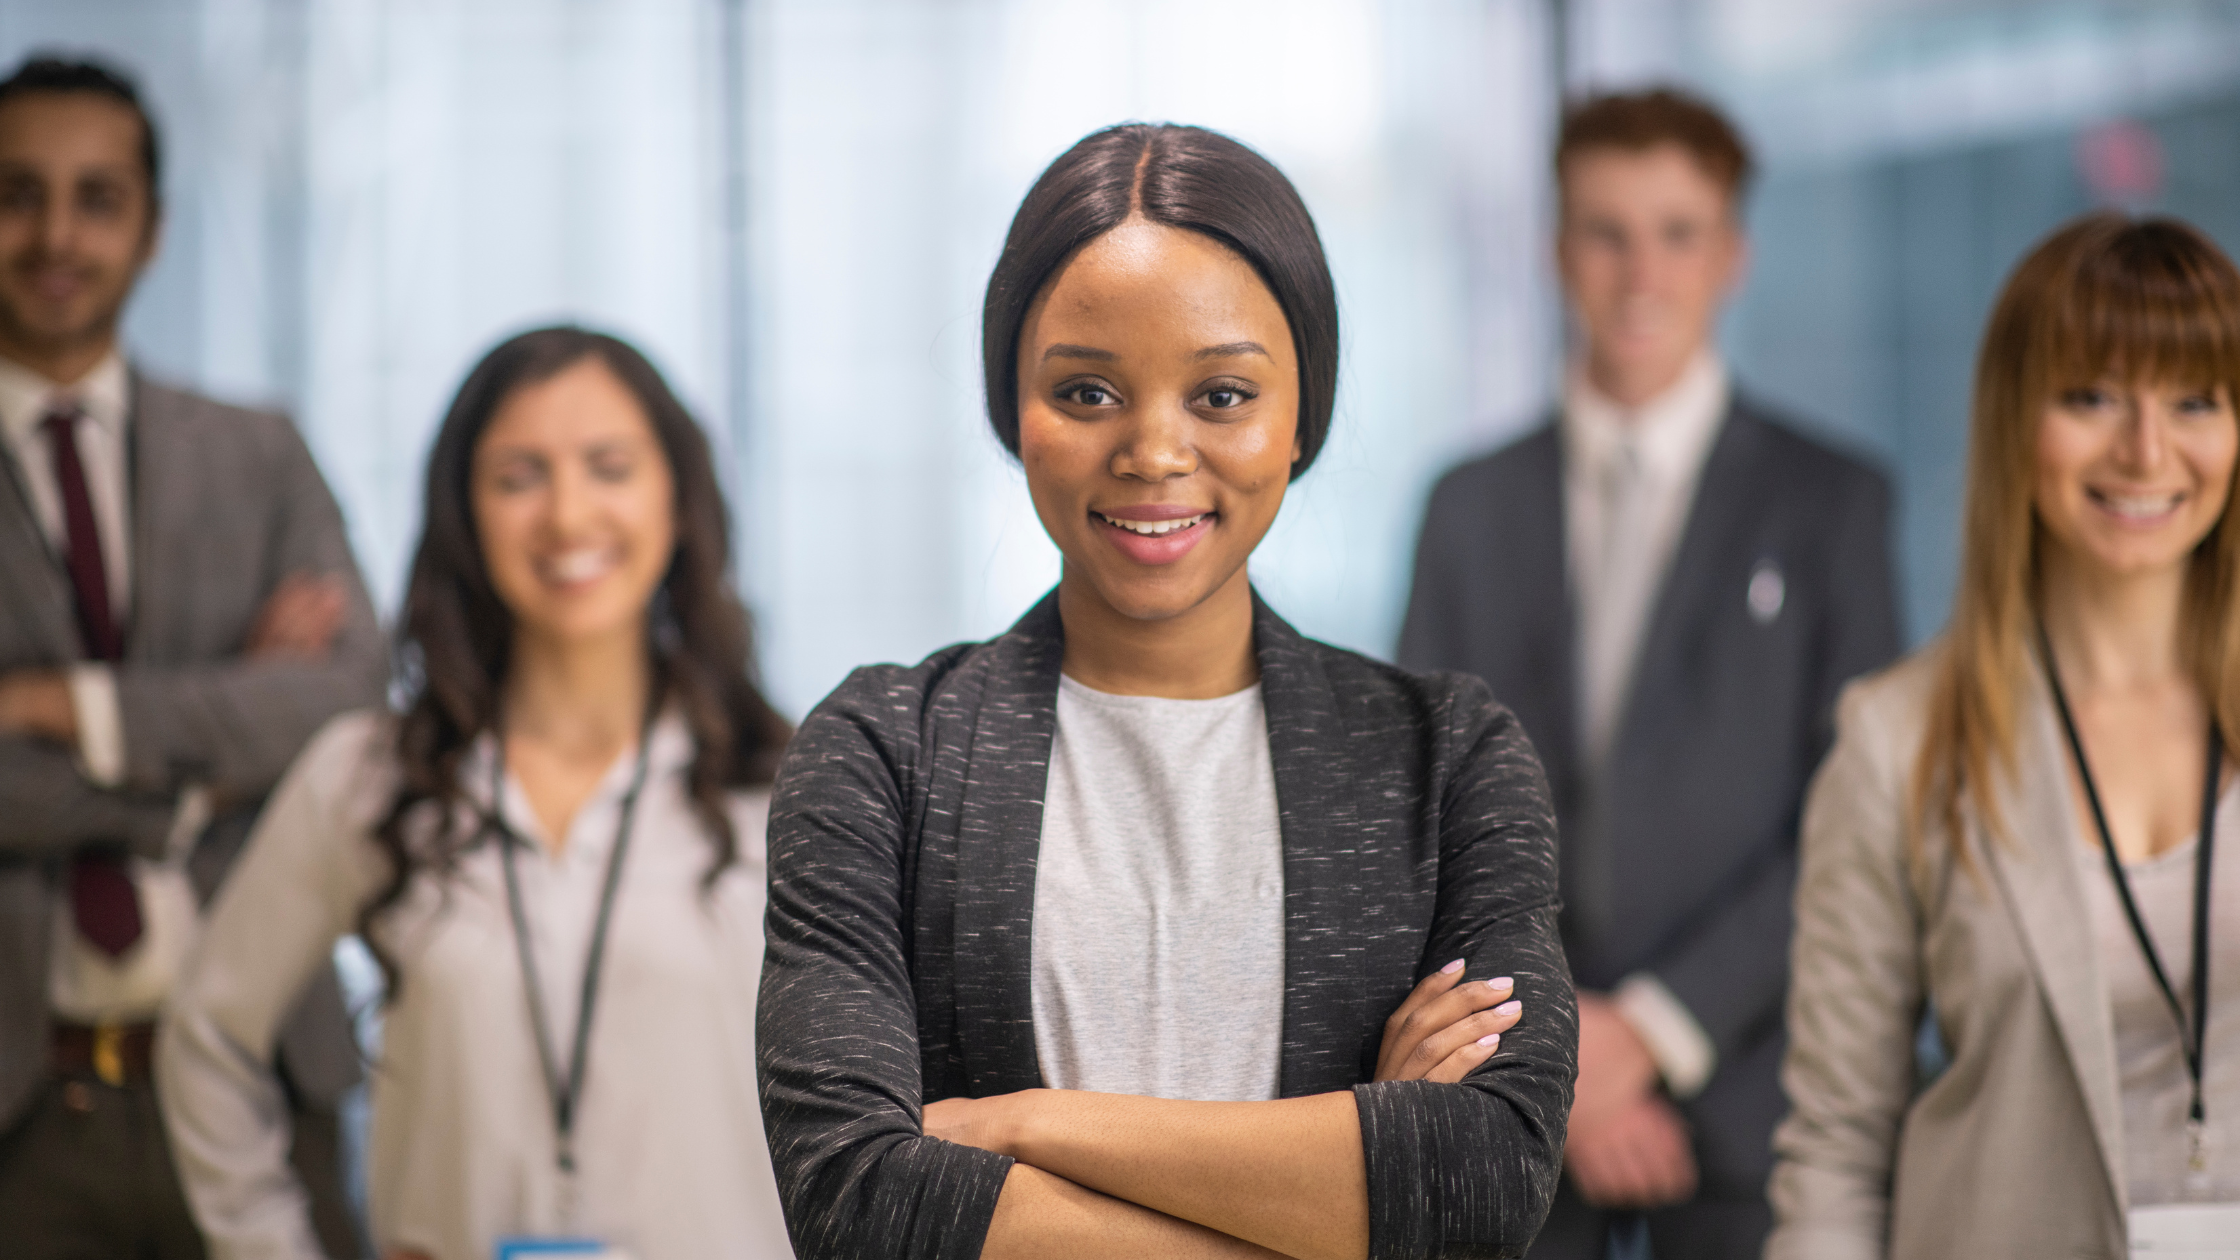 Confident young African-American female leader standing in front, symbolizing diversity in leadership.